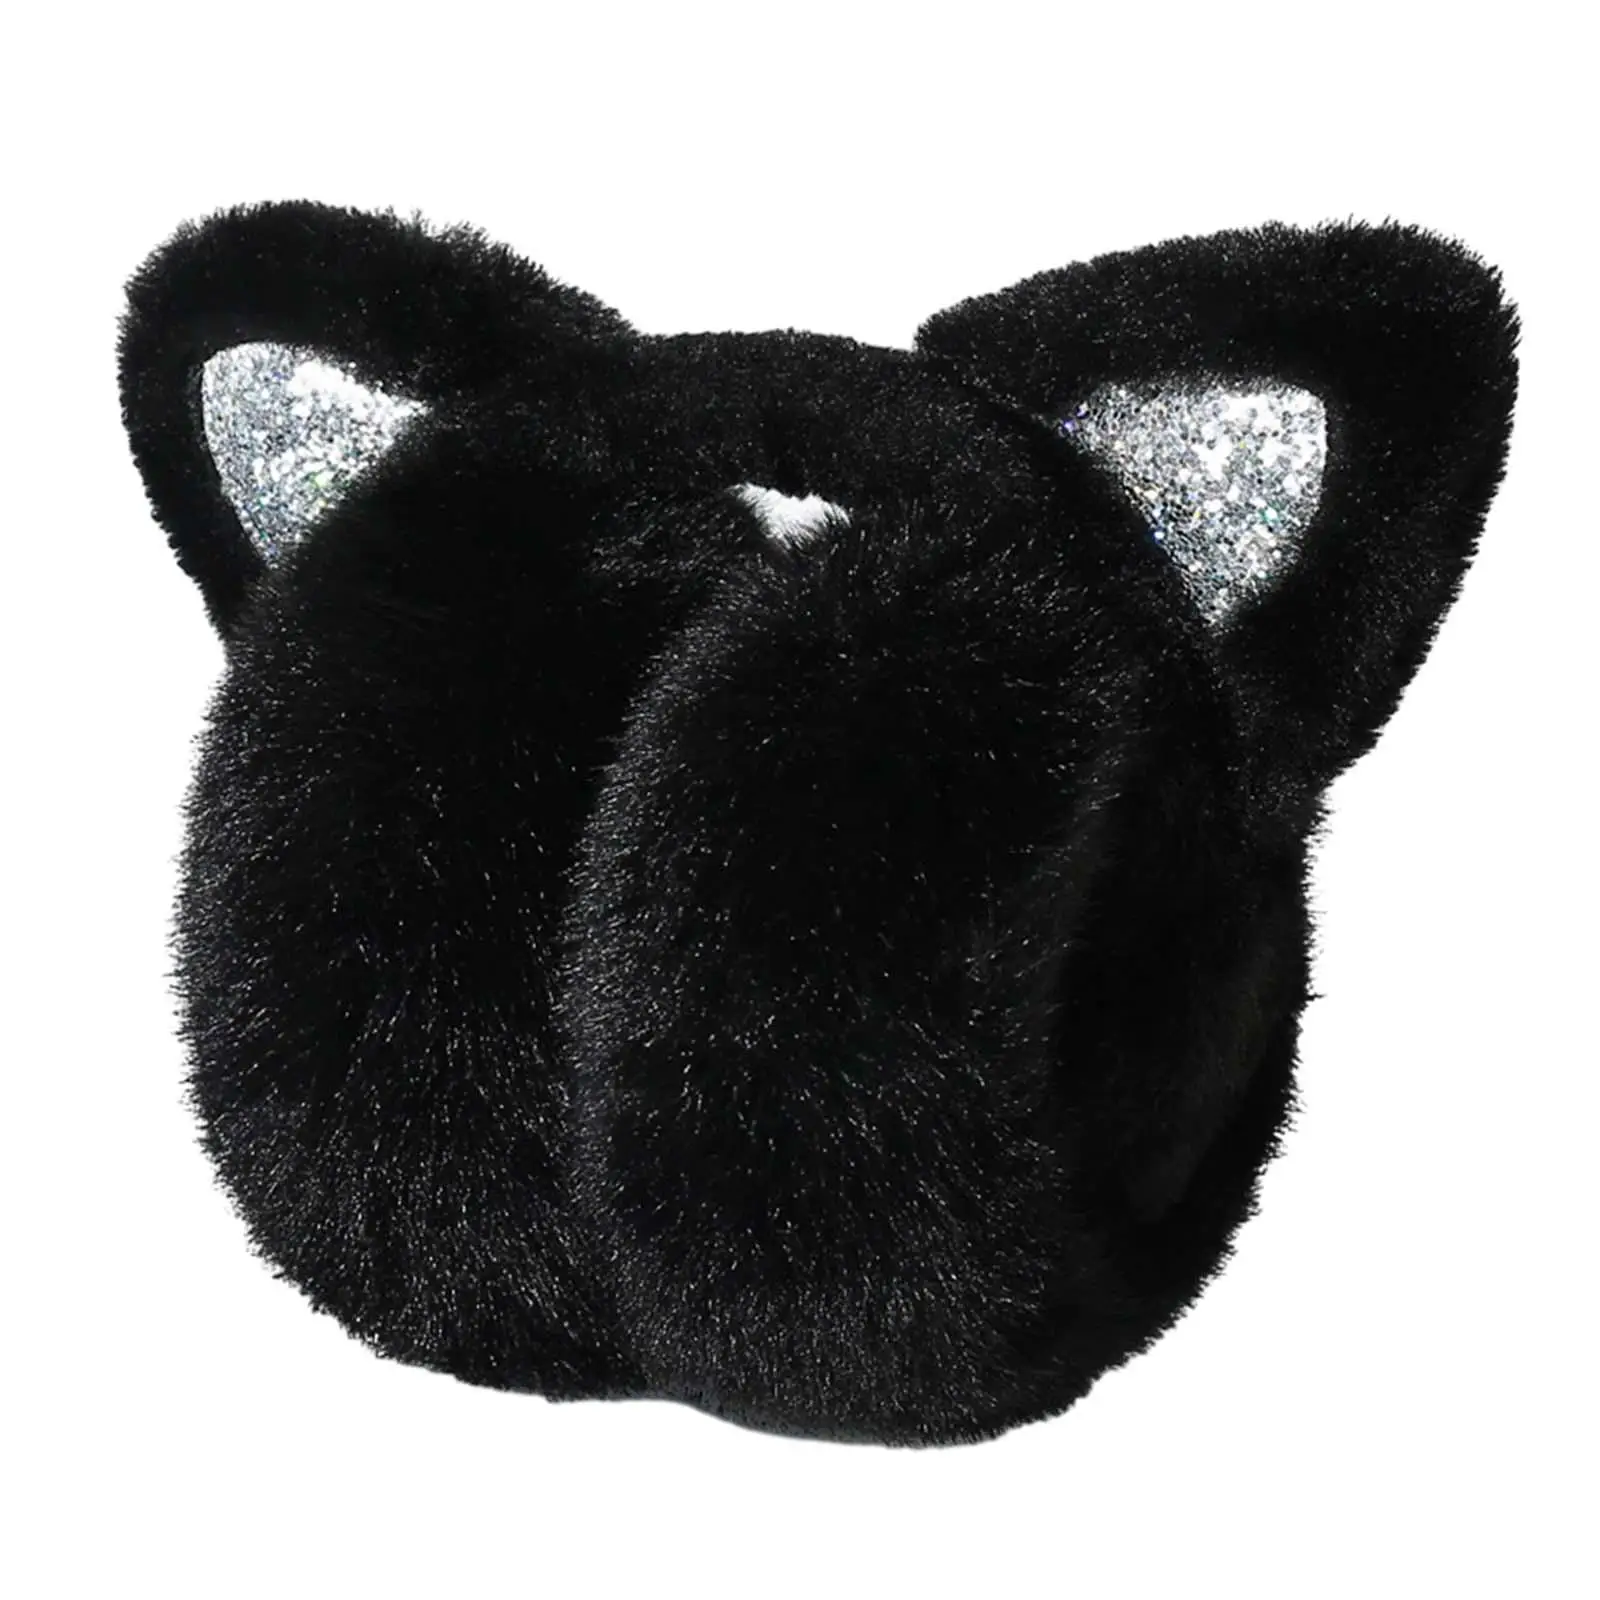 Winter Ear Muffs Soft Warm Foldable Women Polyester Ear Warmers Earmuffs for Skating Traveling Outdoor Activities Skiing Riding